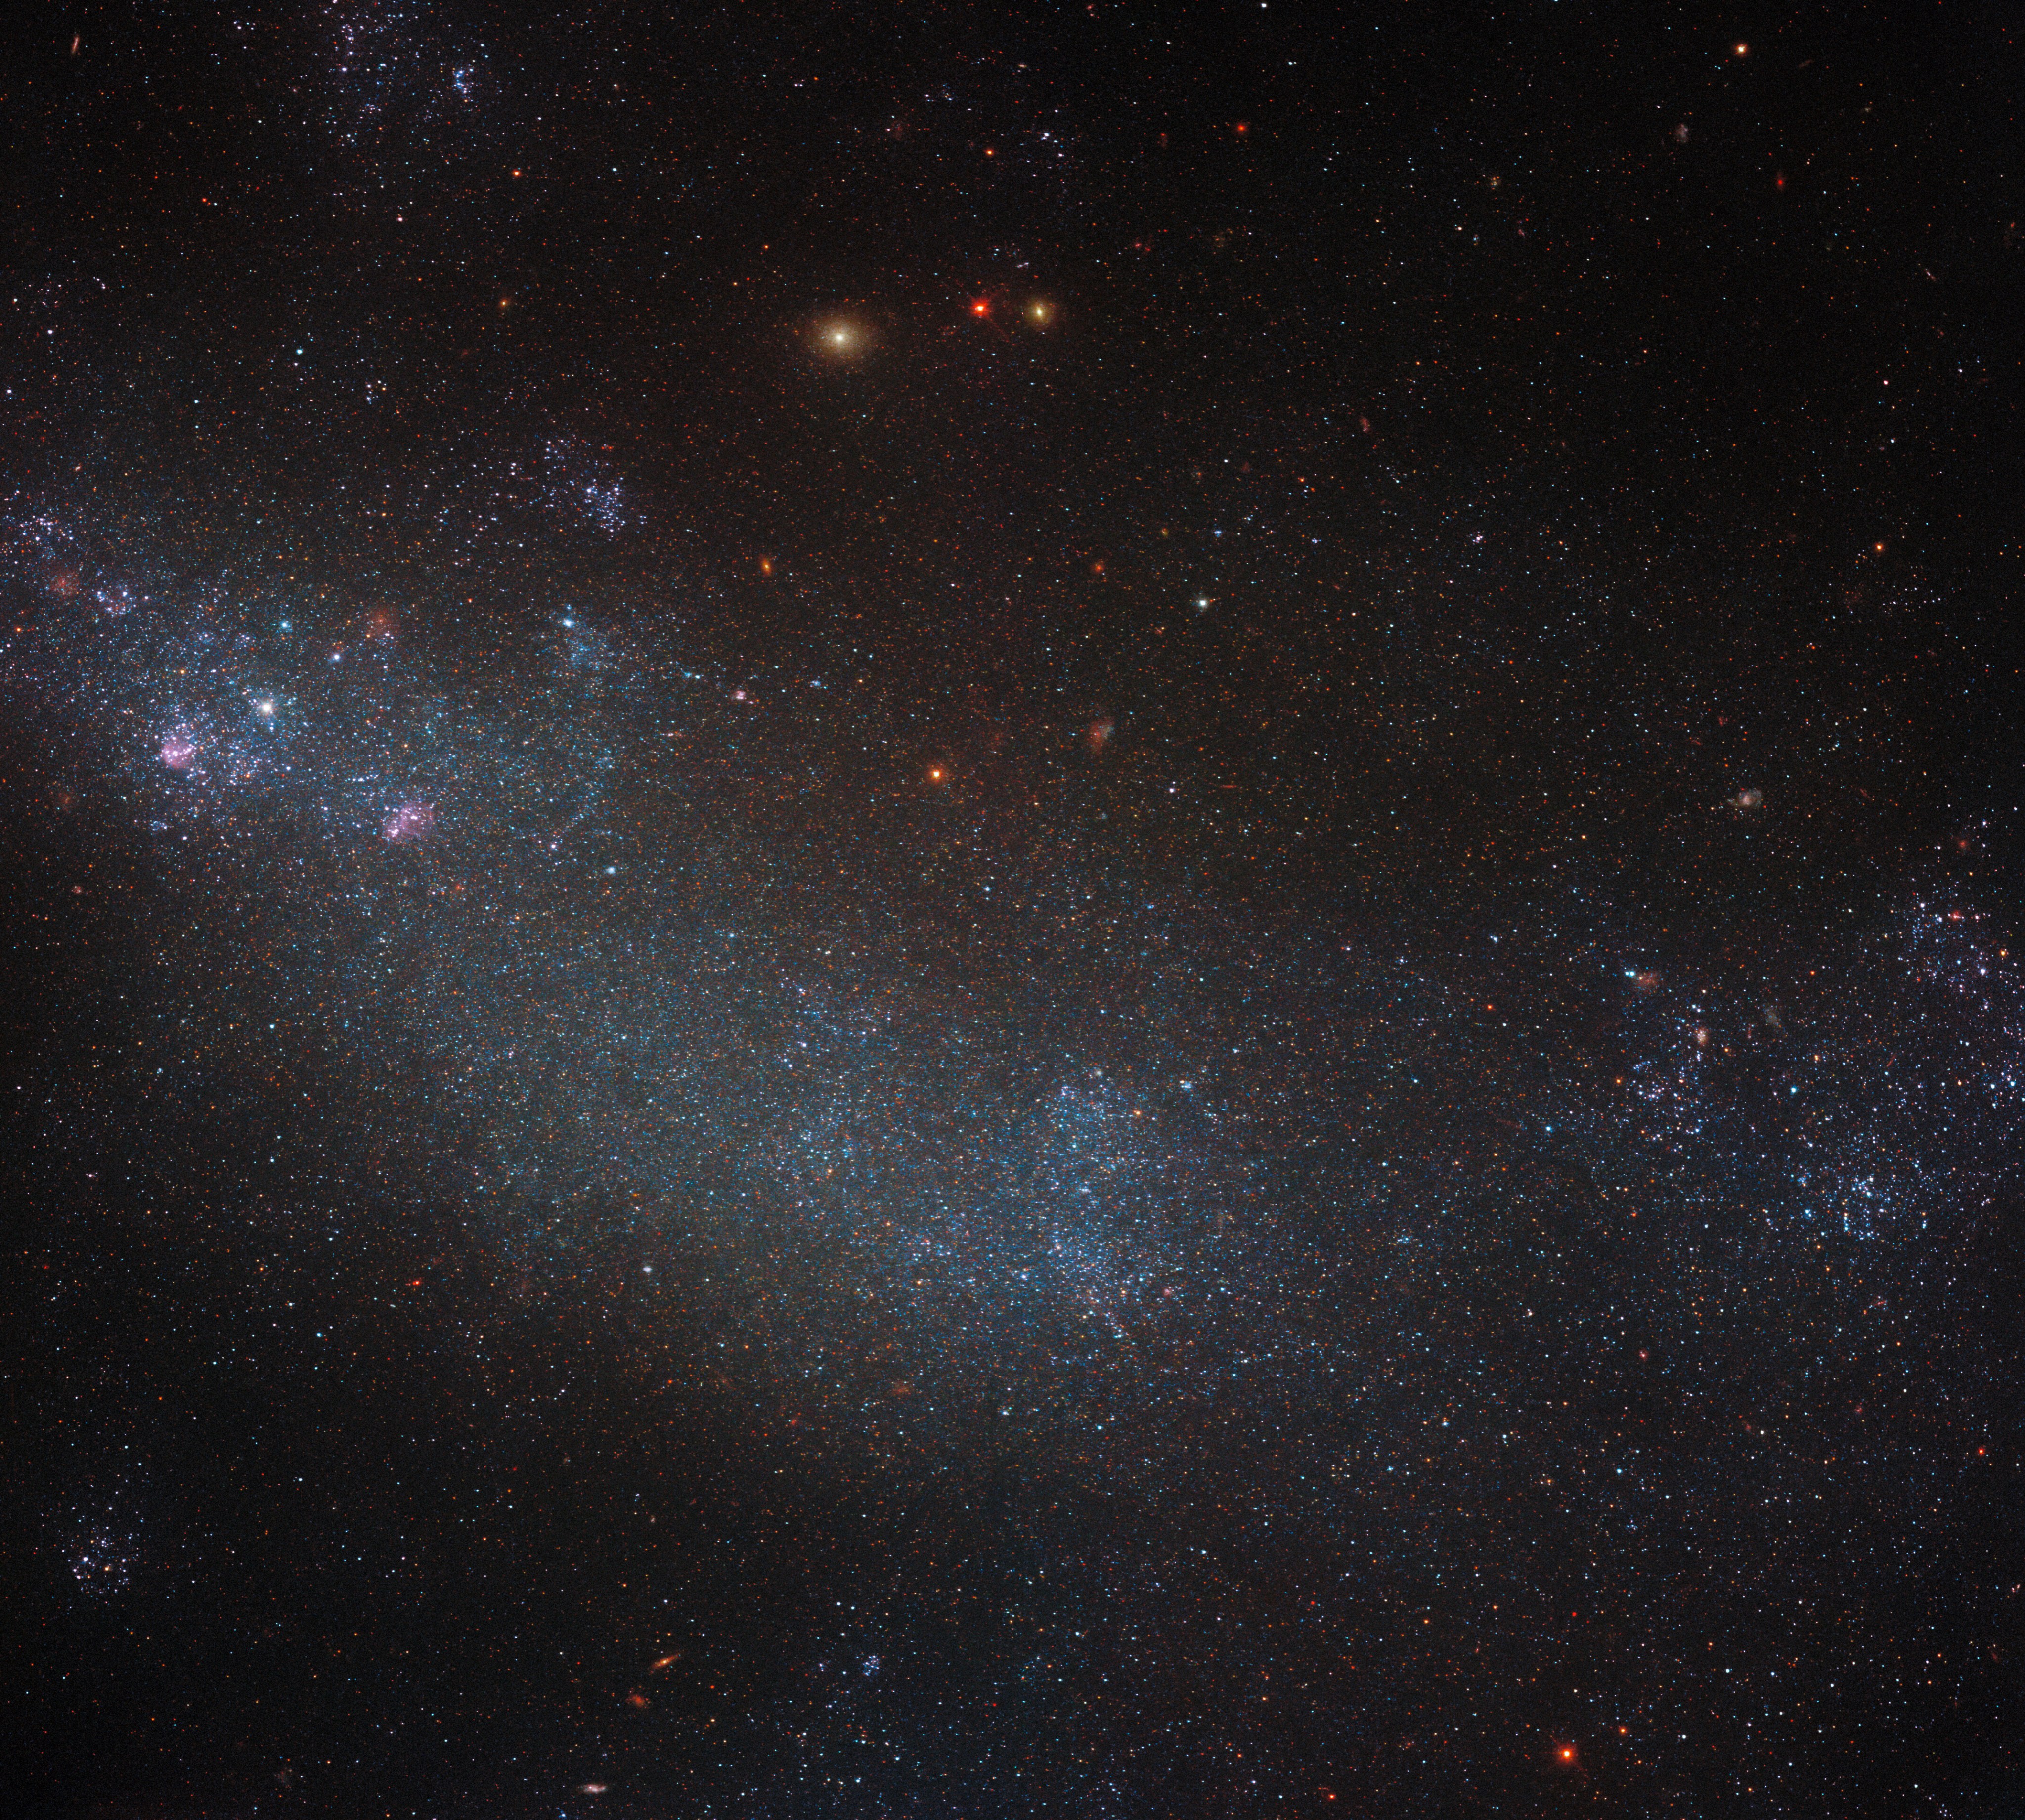 An irregular galaxy: a cloud of tiny, point-like stars on a dark background. The cloud is densest along a broad, curved band across the center of the image. It is colored a faint blue with glowing purplish patches, and the stars grow less dense out to the edges but don’t fully vanish. A few distant background galaxies appear among the stars as glowing spots.